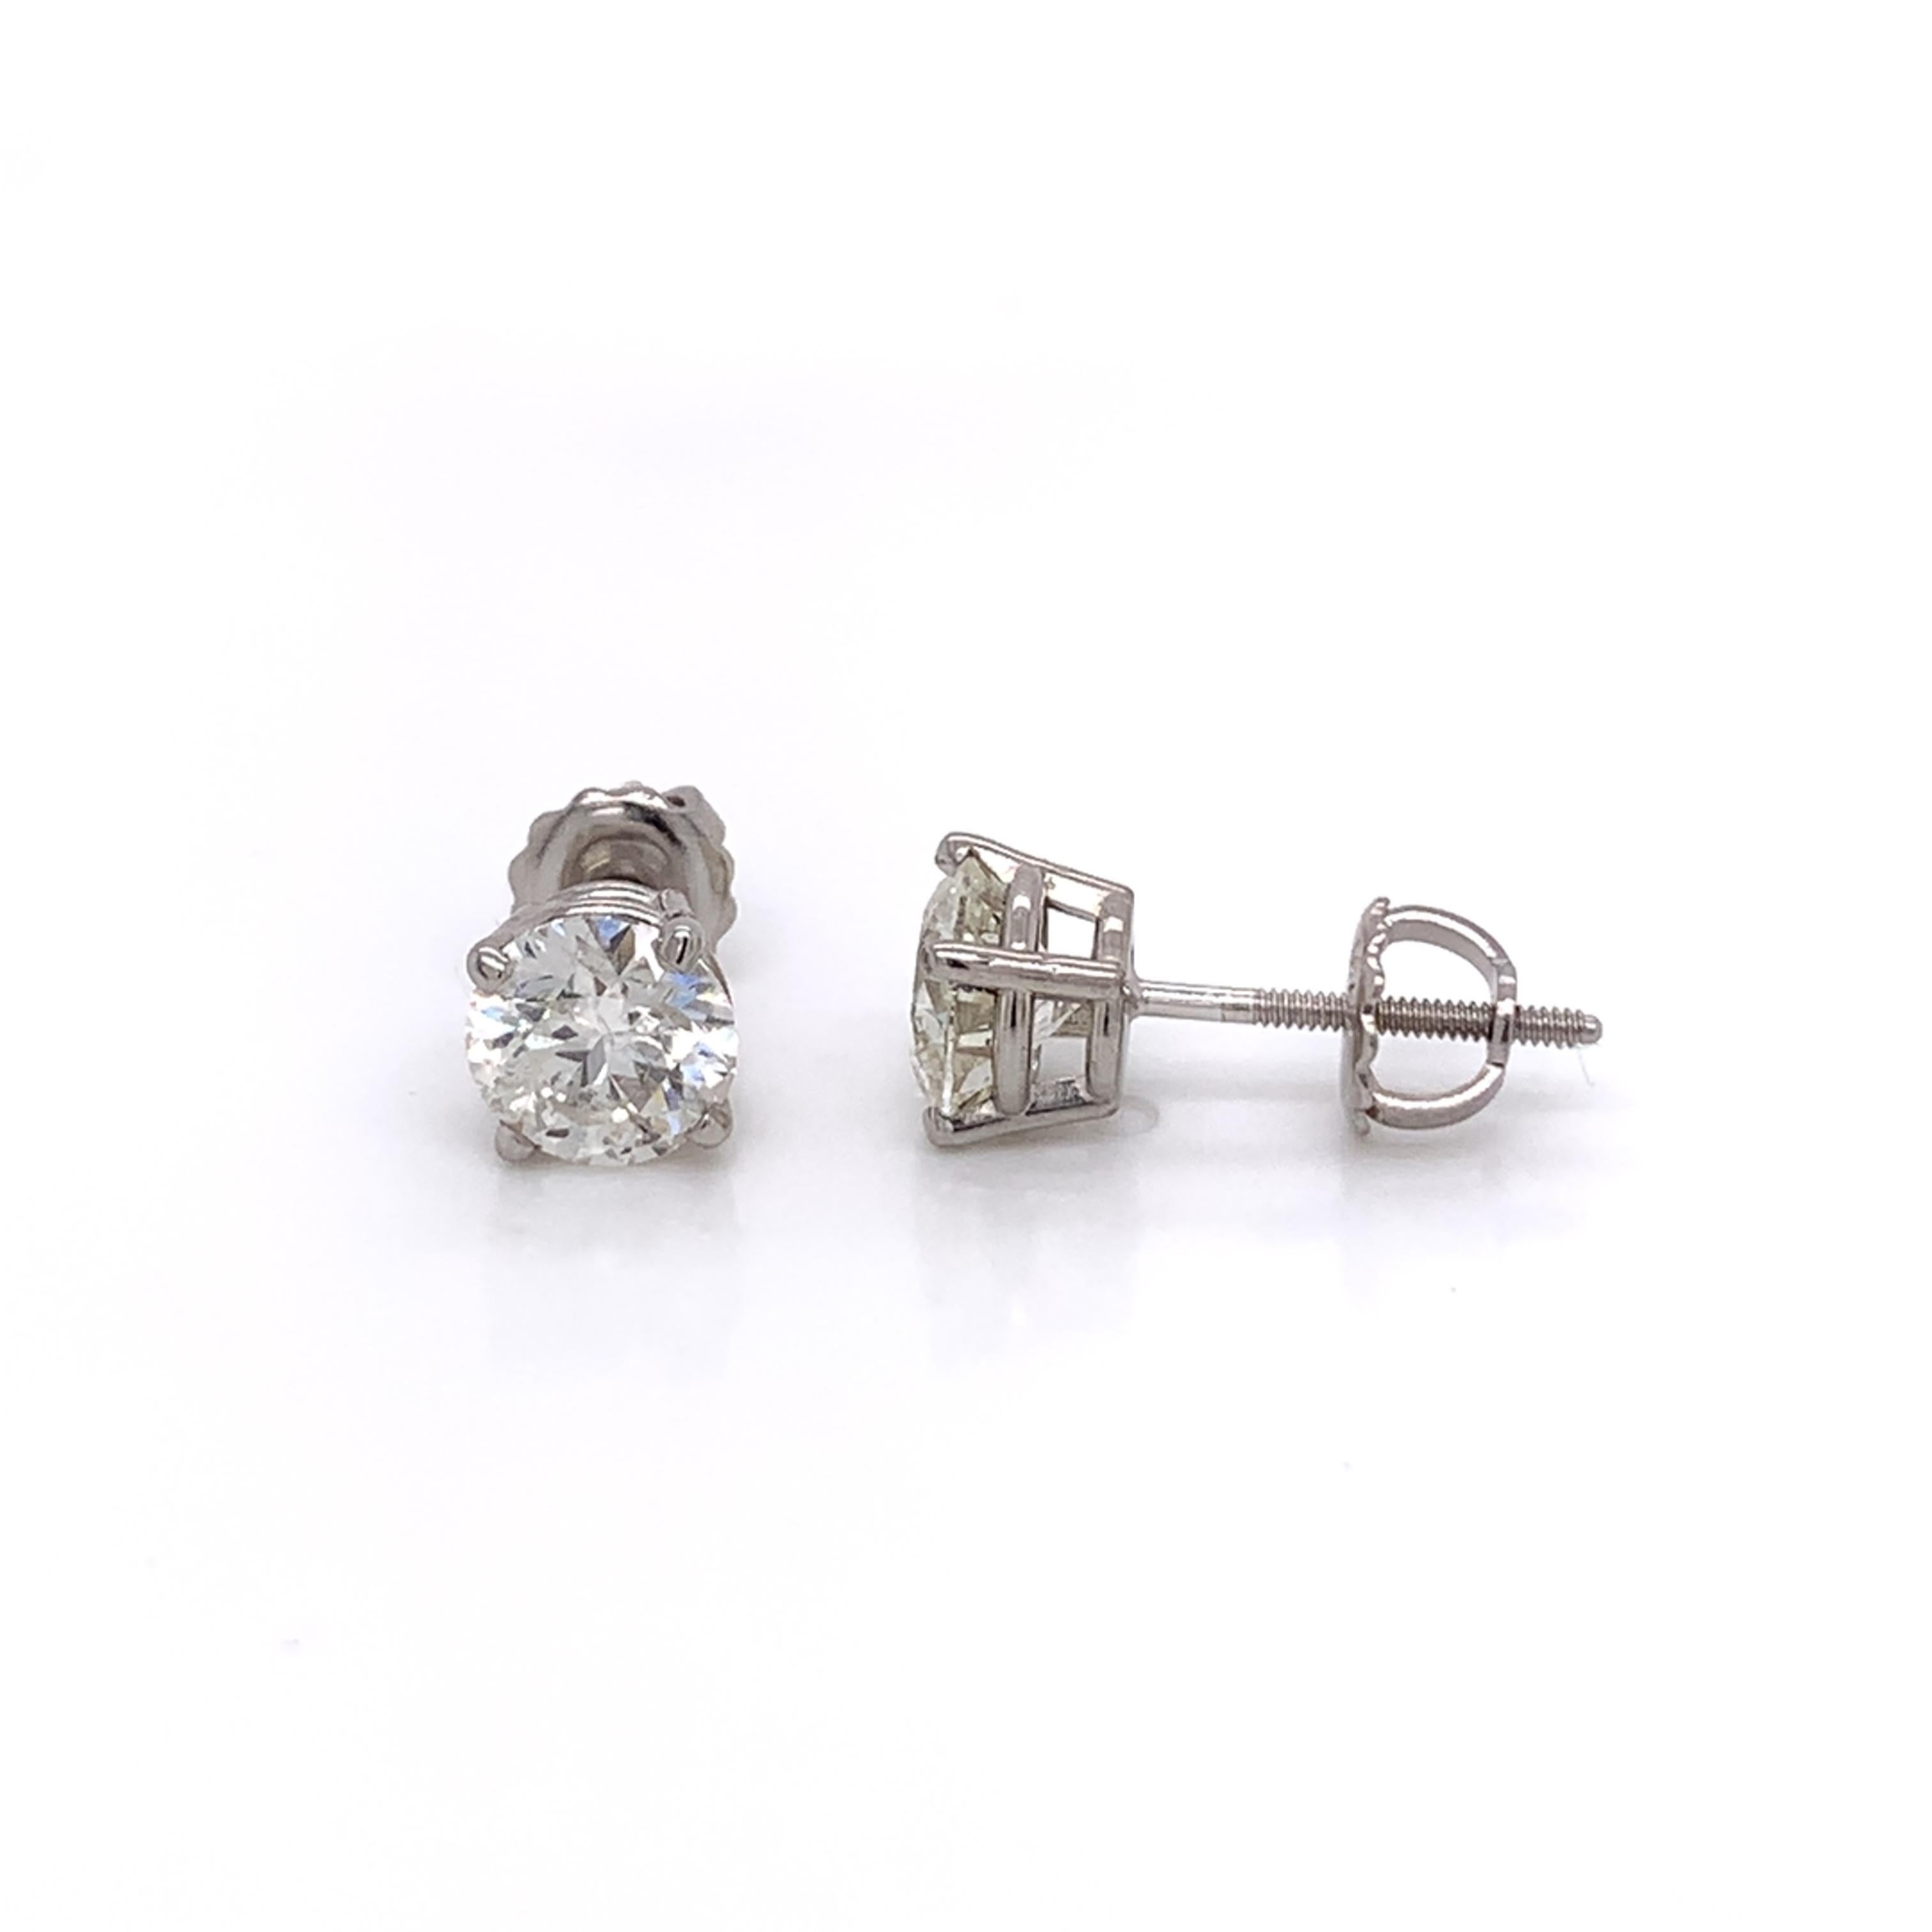 2.06 Carat diamond stud earrings made with real/natural brilliant cut diamonds. Total Diamond Weight: 2.06 carats. Diamond Quantity: 2 round diamonds. Color: G-H. Clarity: SI2-SI3. Mounted on 18 karat white gold screw back setting.